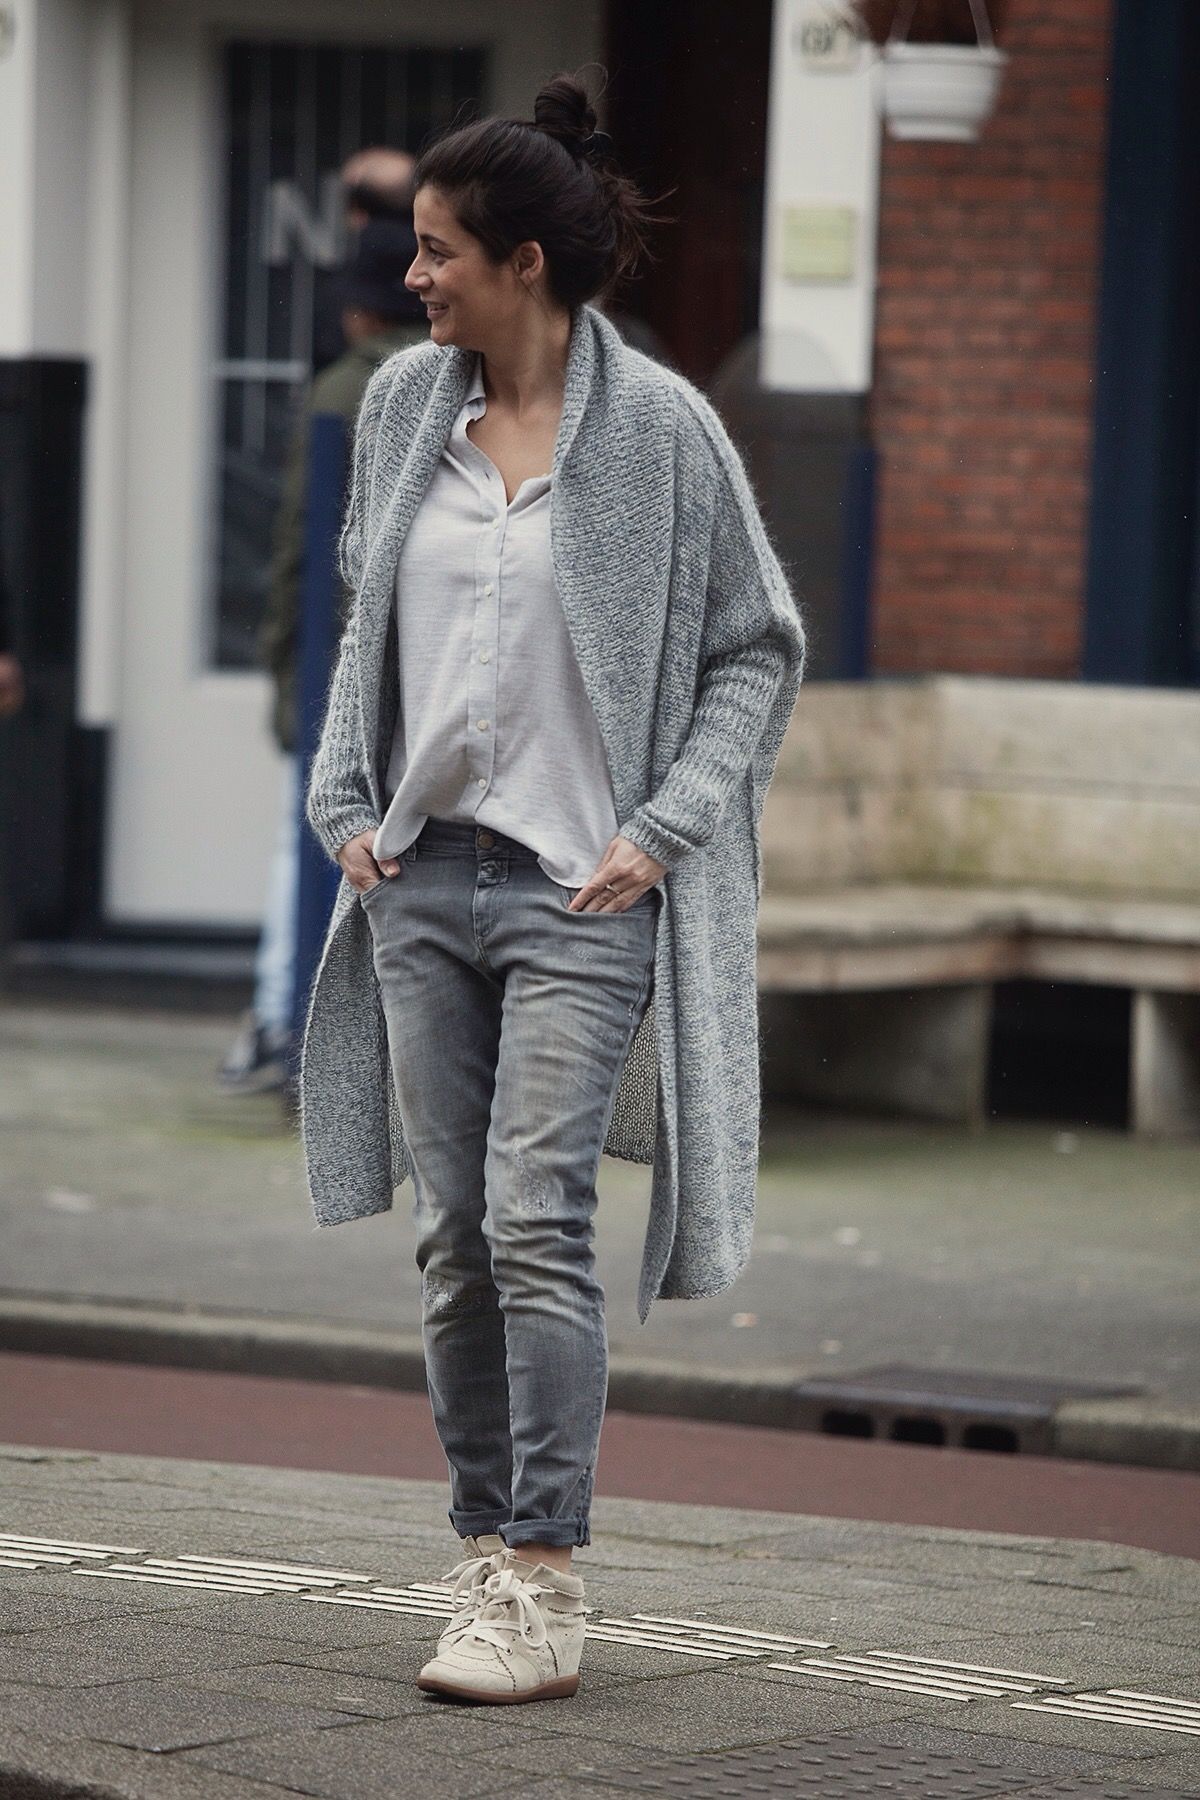 streetstyle spring 2016 long knitted cardigan and boyfriend skinny jeans, bobby sneakers isabel Marant by BlogForShops